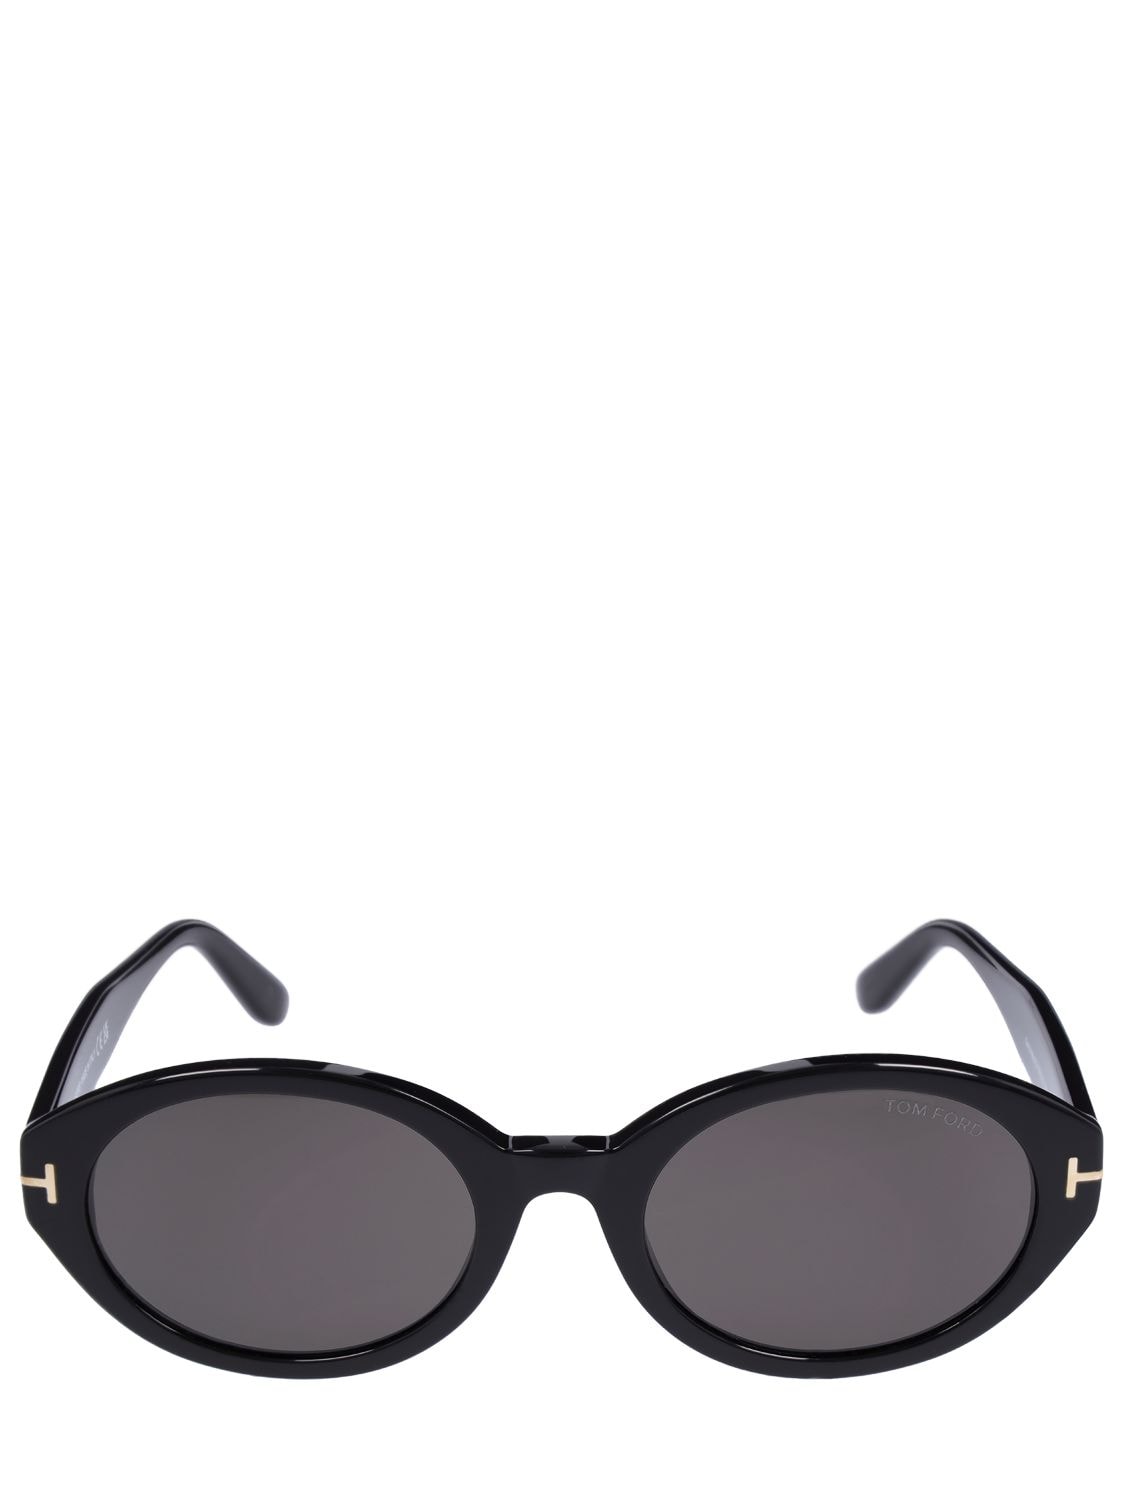 Tom Ford Genevieve Oval Acetate Sunglasses In Black